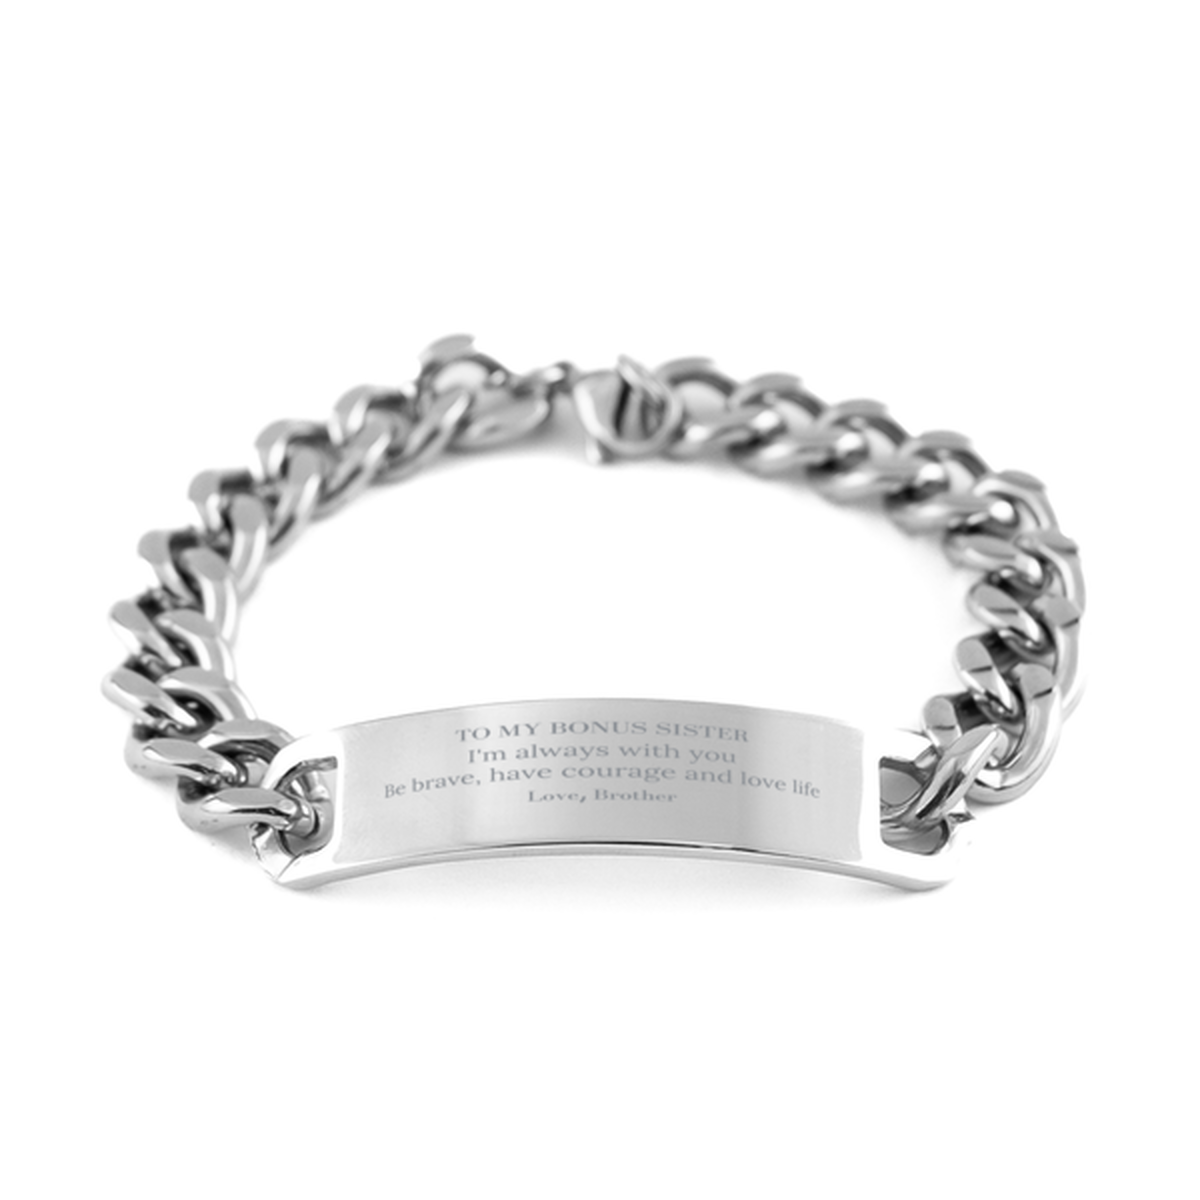 To My Bonus Sister Gifts from Brother, Unique Cuban Chain Stainless Steel Bracelet Inspirational Christmas Birthday Graduation Gifts for Bonus Sister I'm always with you. Be brave, have courage and love life. Love, Brother